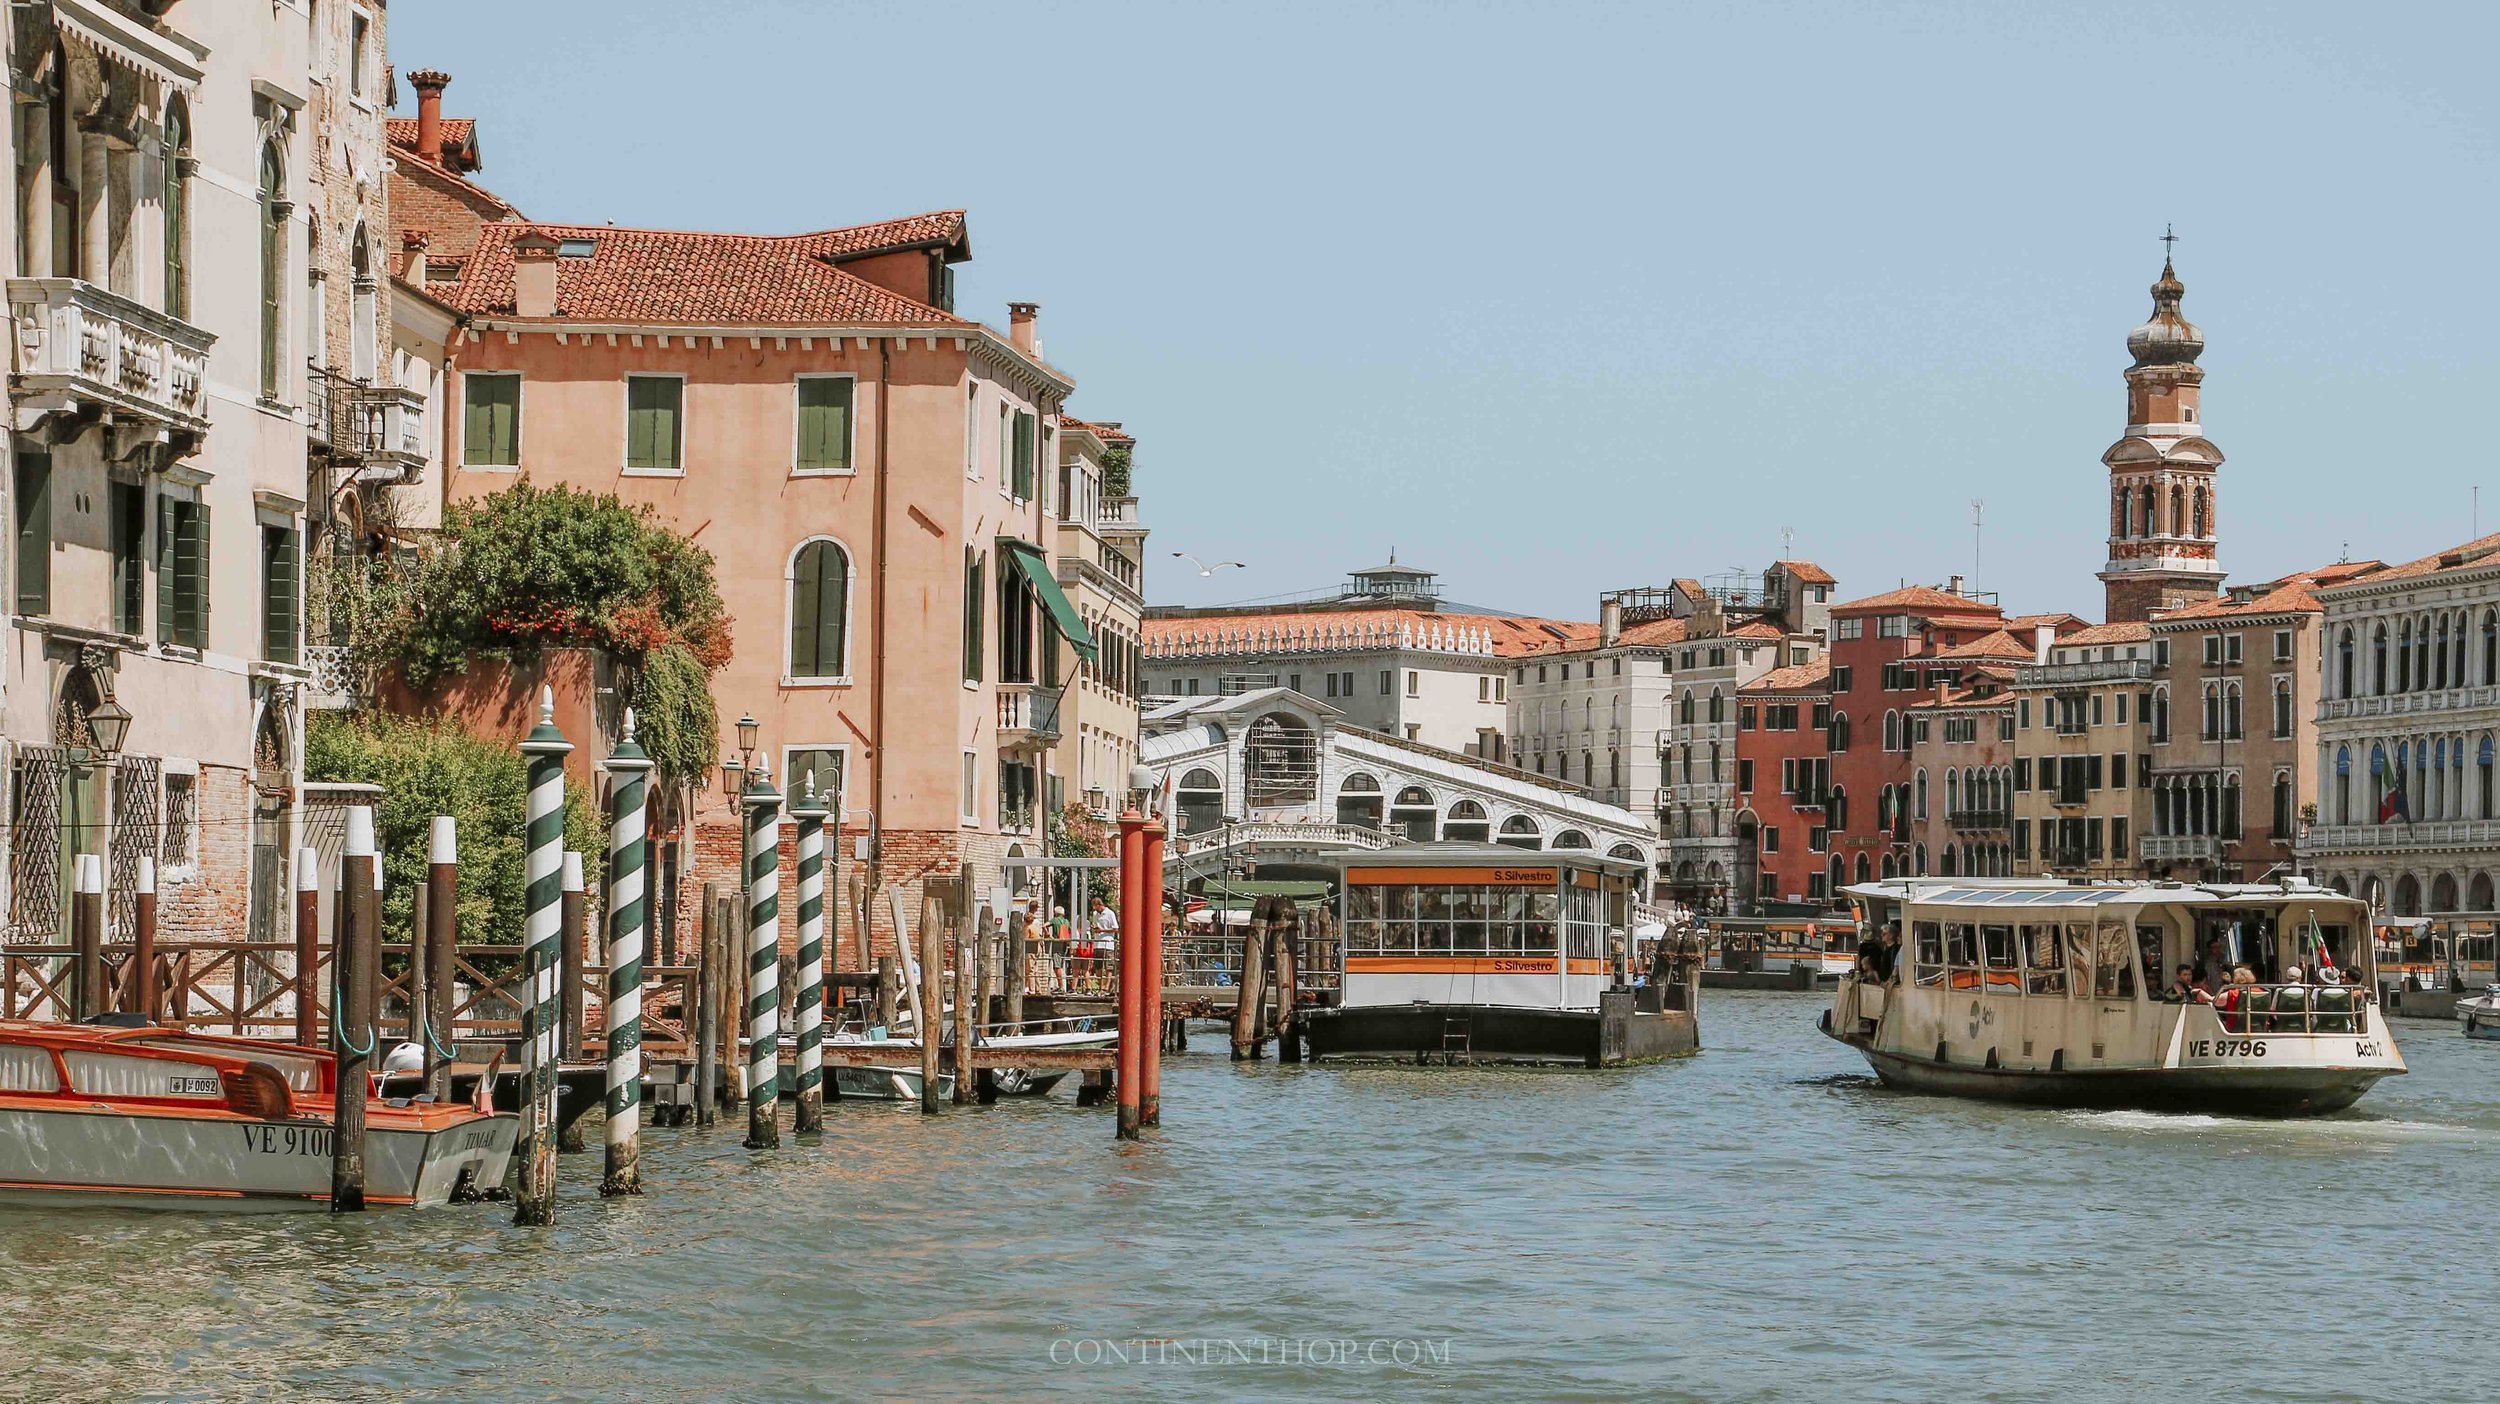 Colourful buildings by the canals in Venice on a 3 month europe travel itinerary